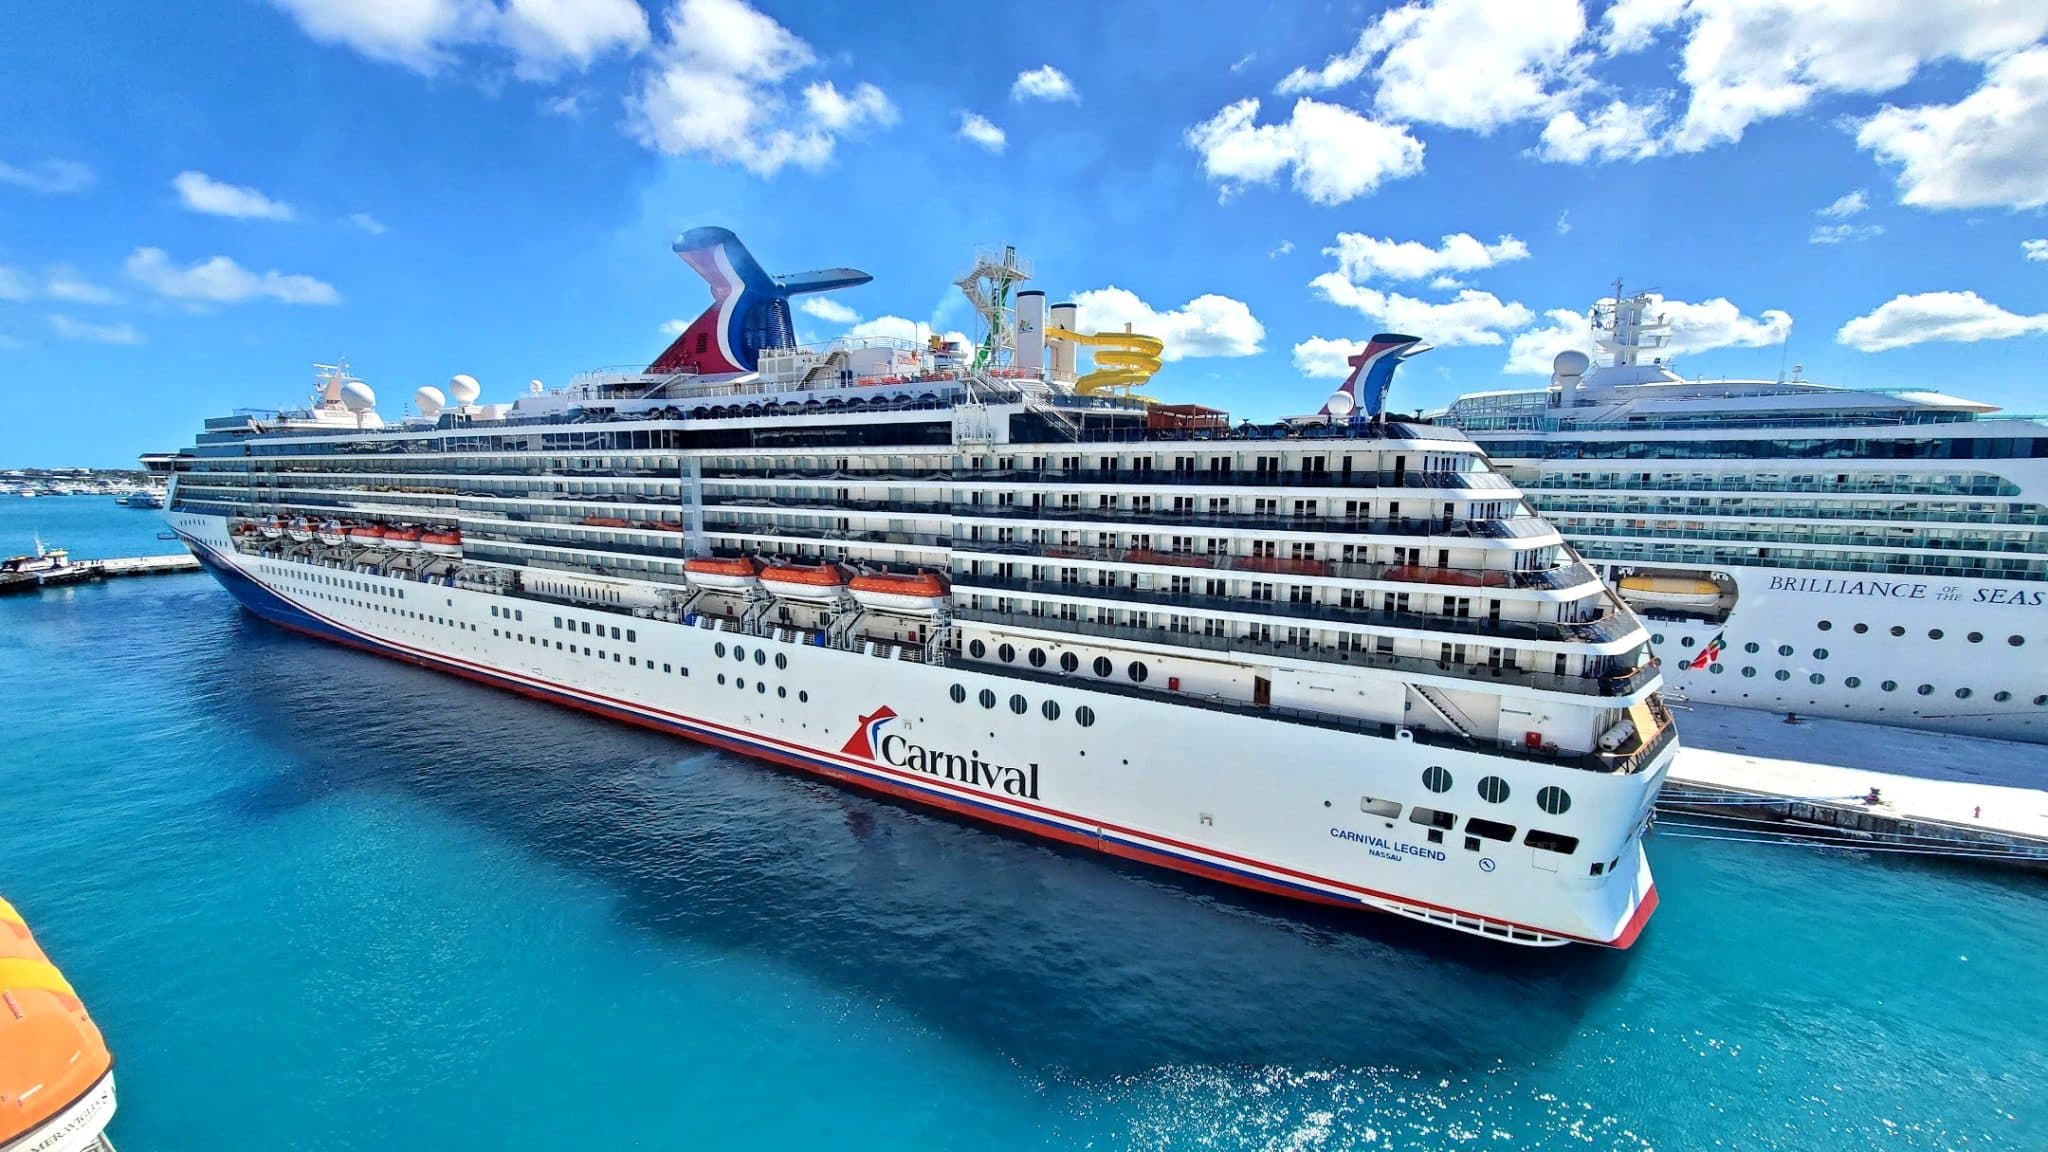 Carnival Legend in cruise port in Nassau on sunny day